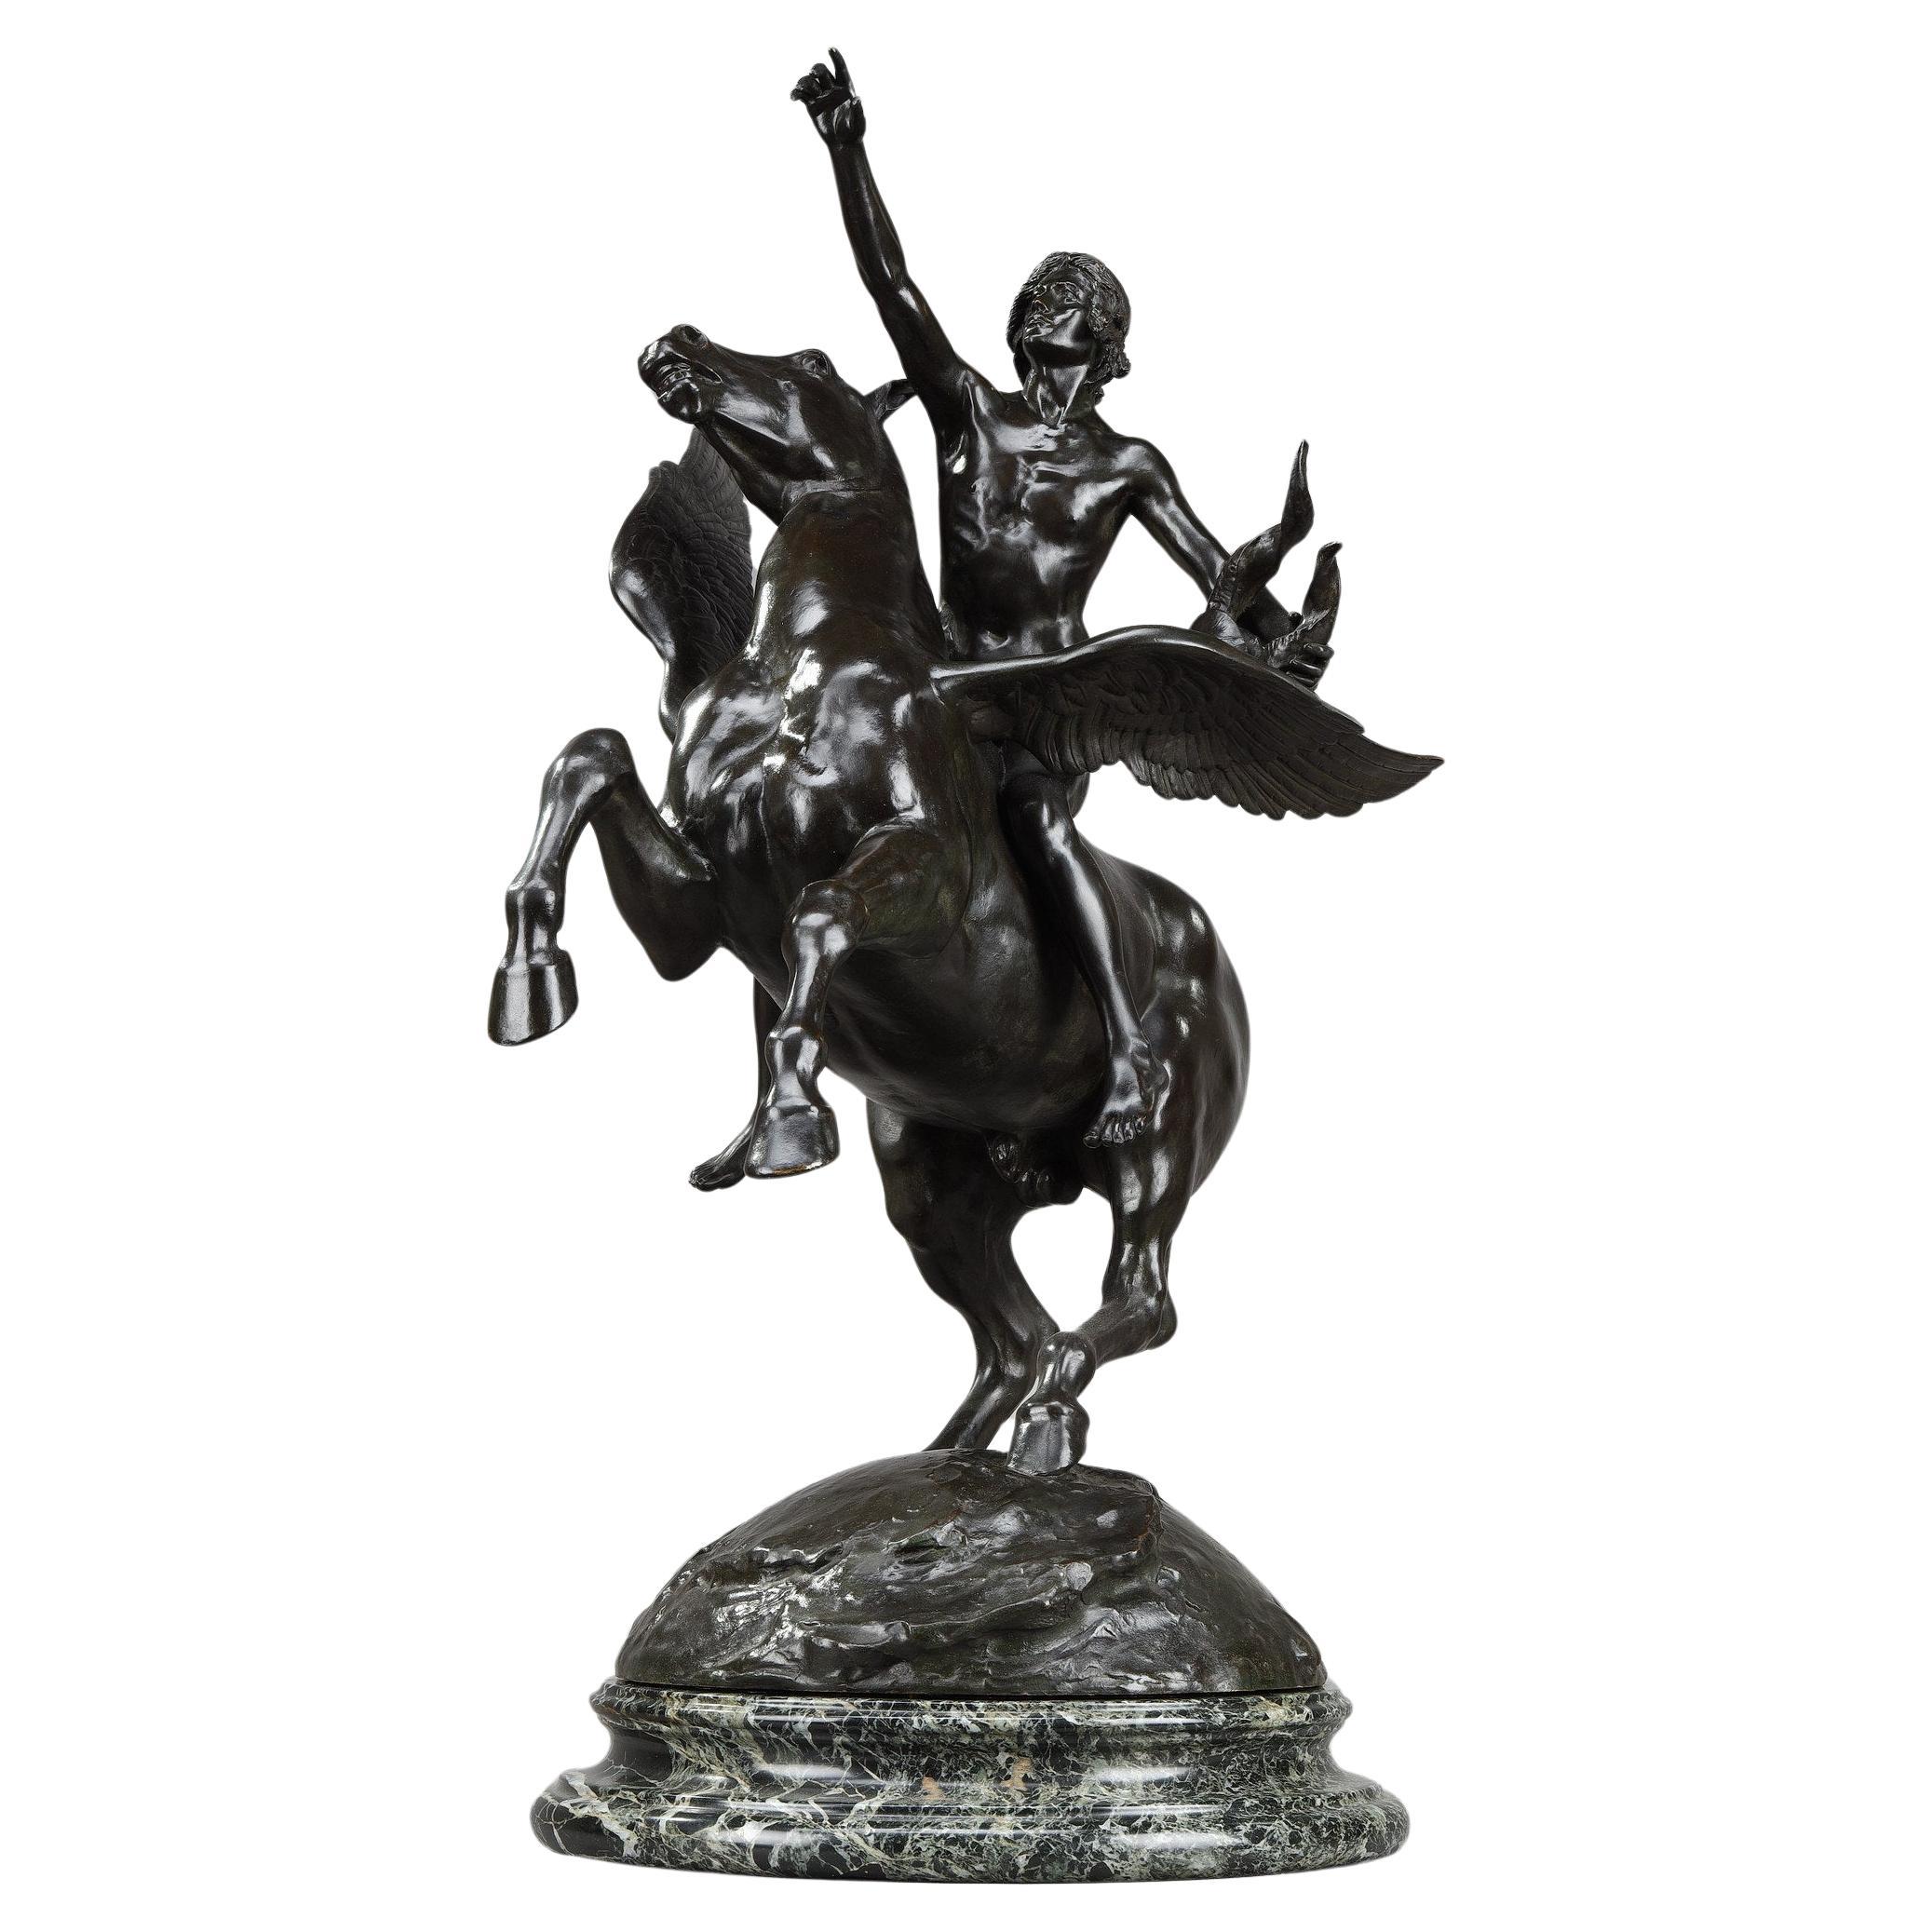  Bronze Sculpture of "Pagasus Carrying the Poet to the Regions of Dreams" For Sale